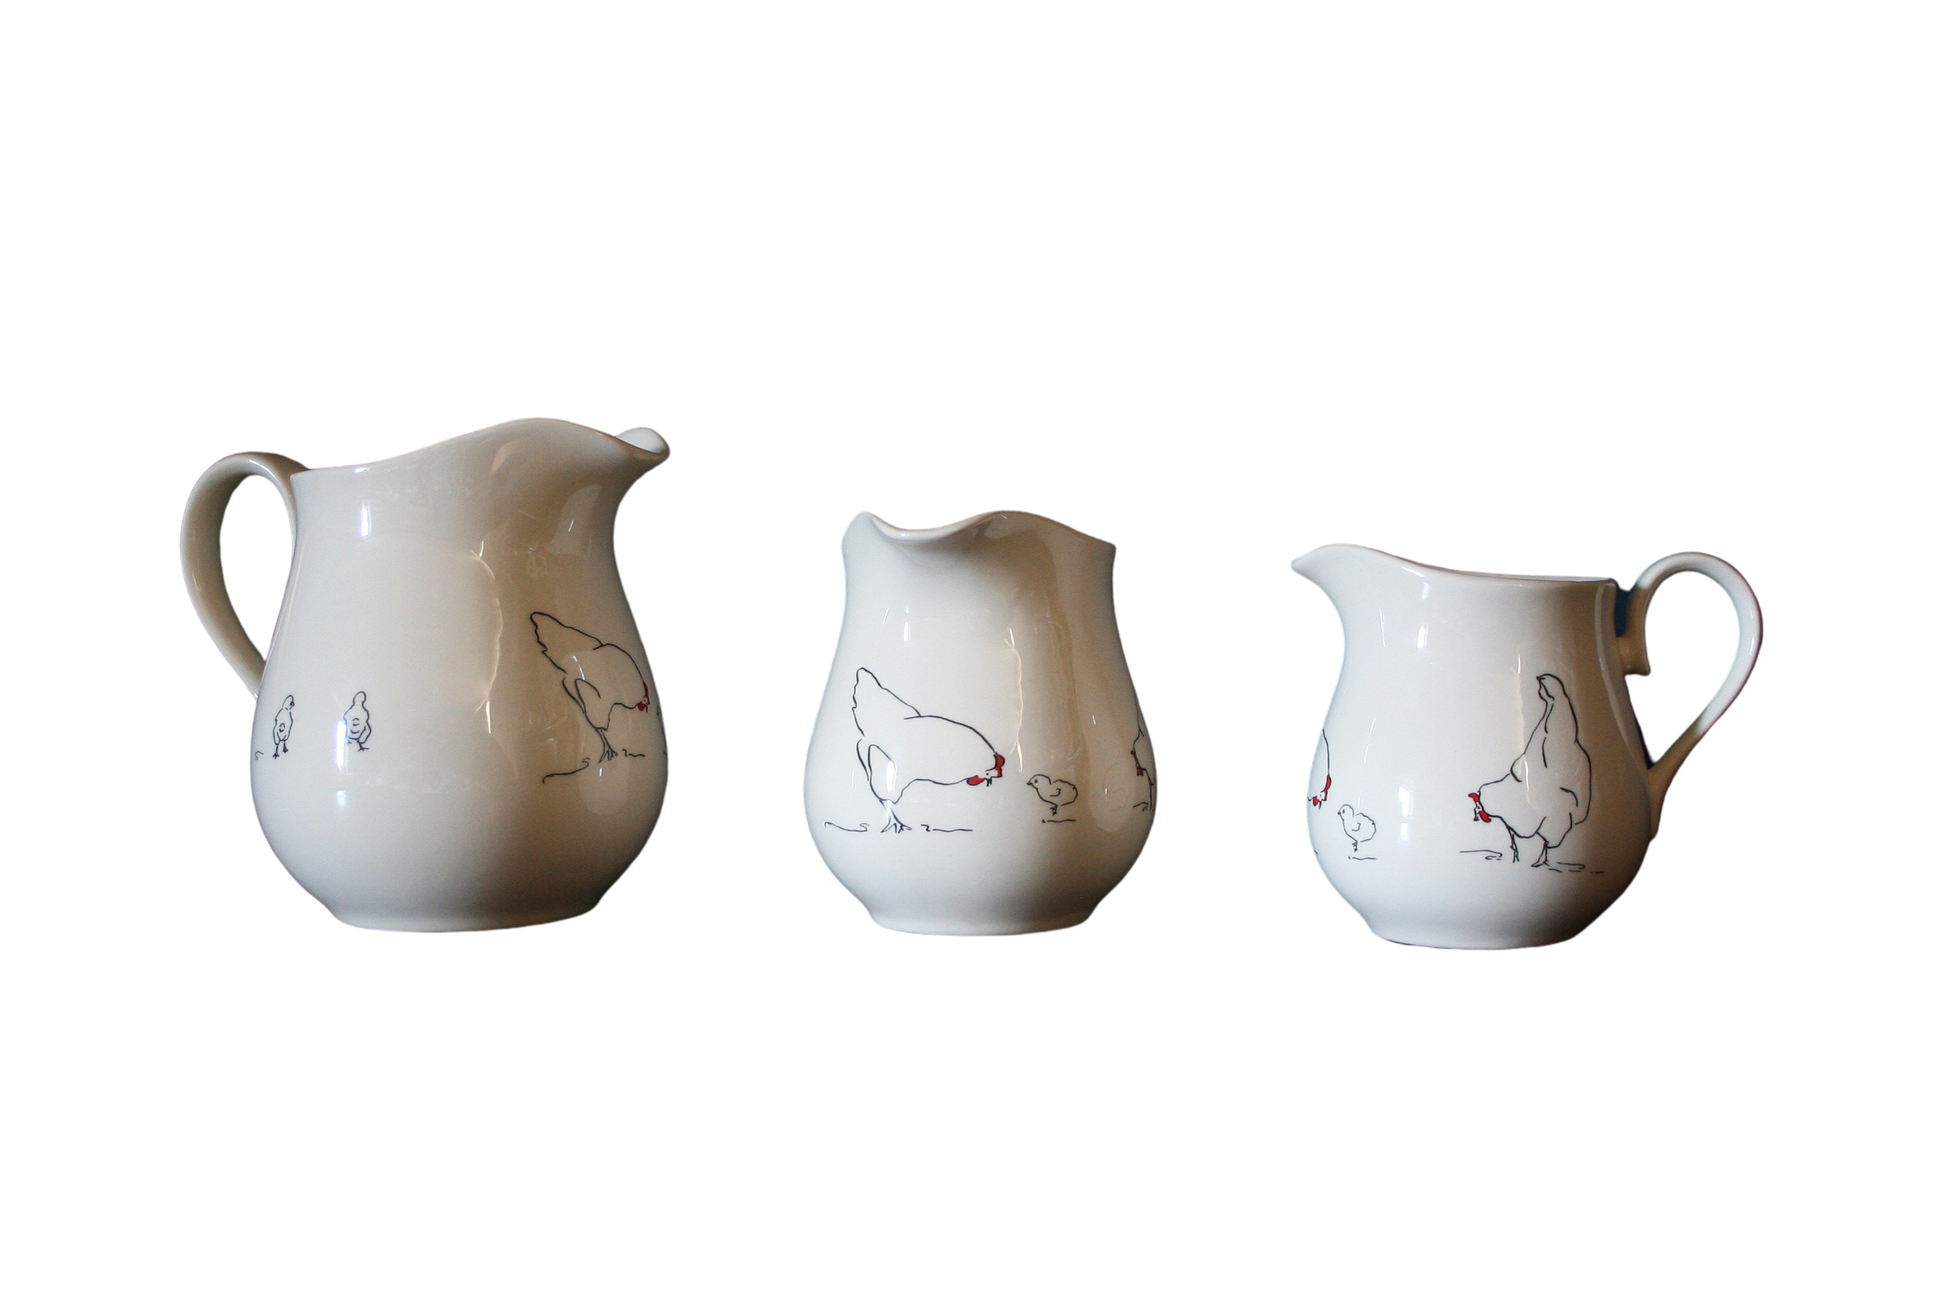 creamwear jug in three sizes with drawings of chickens, hens and chicks going round them